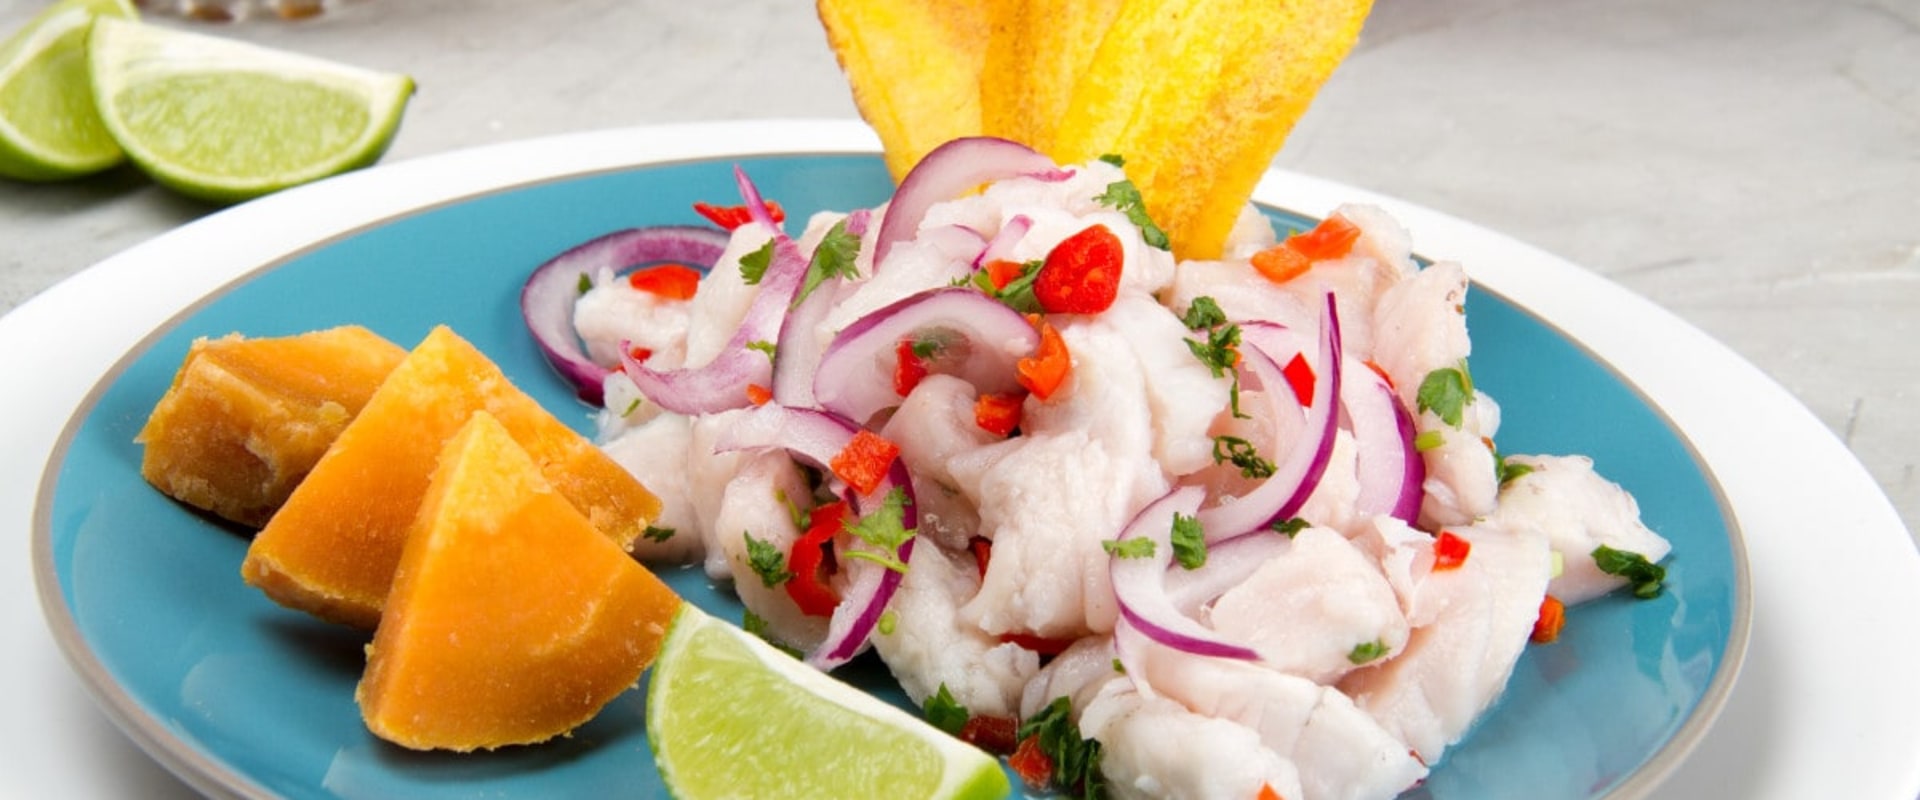 How to Make Traditional Peruvian-style Ceviche with Abalone